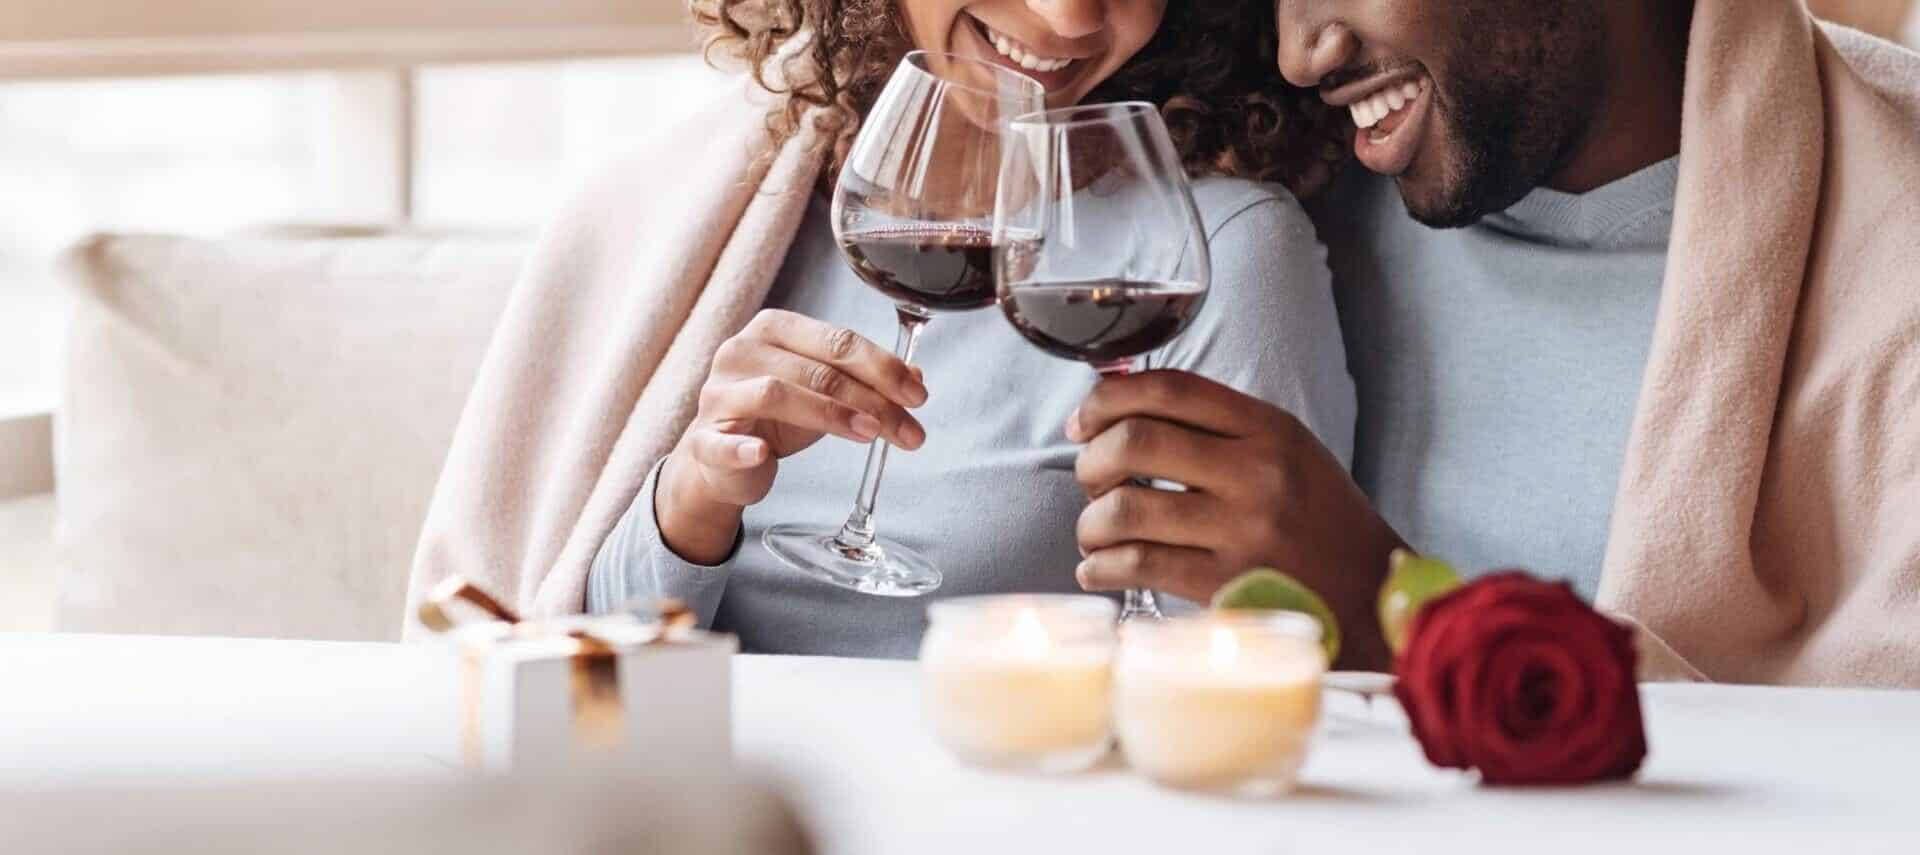 Couple clinking wine glasses while snuggling on a sofa